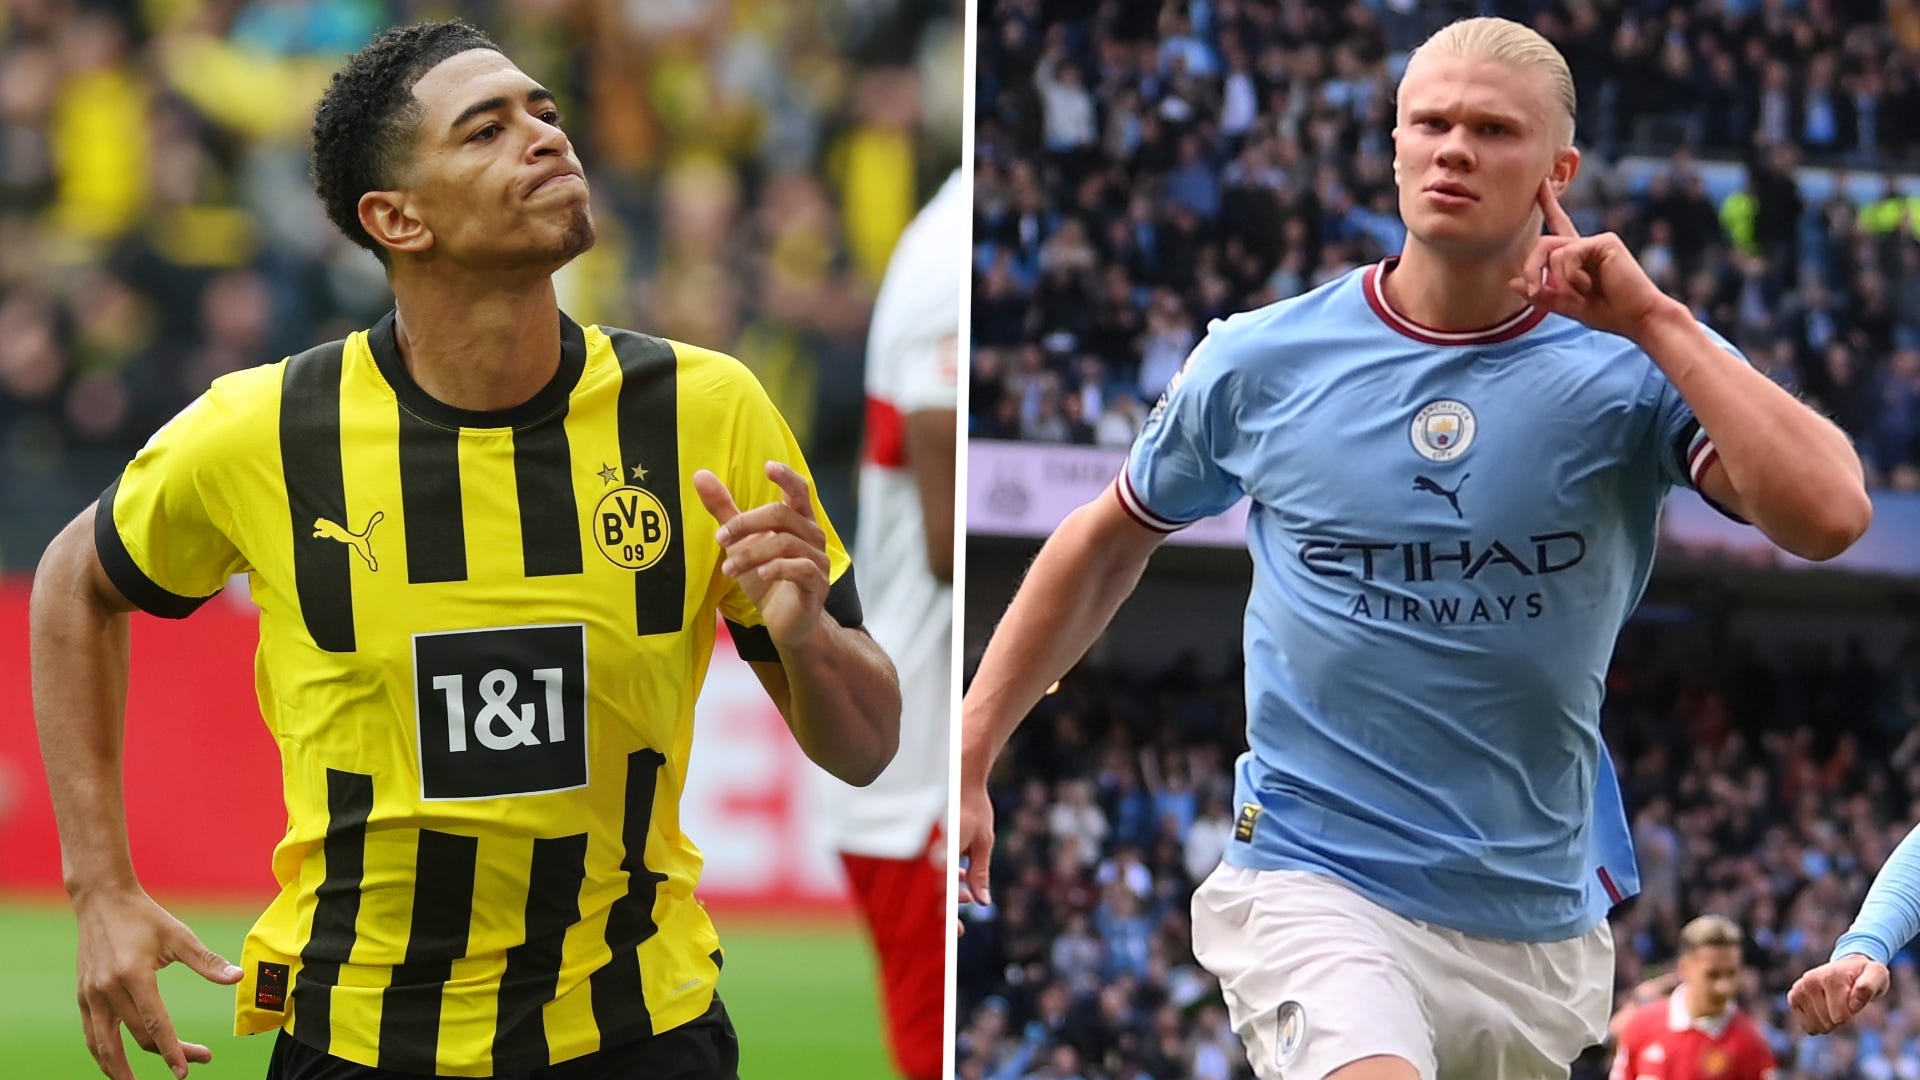 Borussia Dortmund vs Man City Live stream, TV channel, kick-off time and where to watch Goal